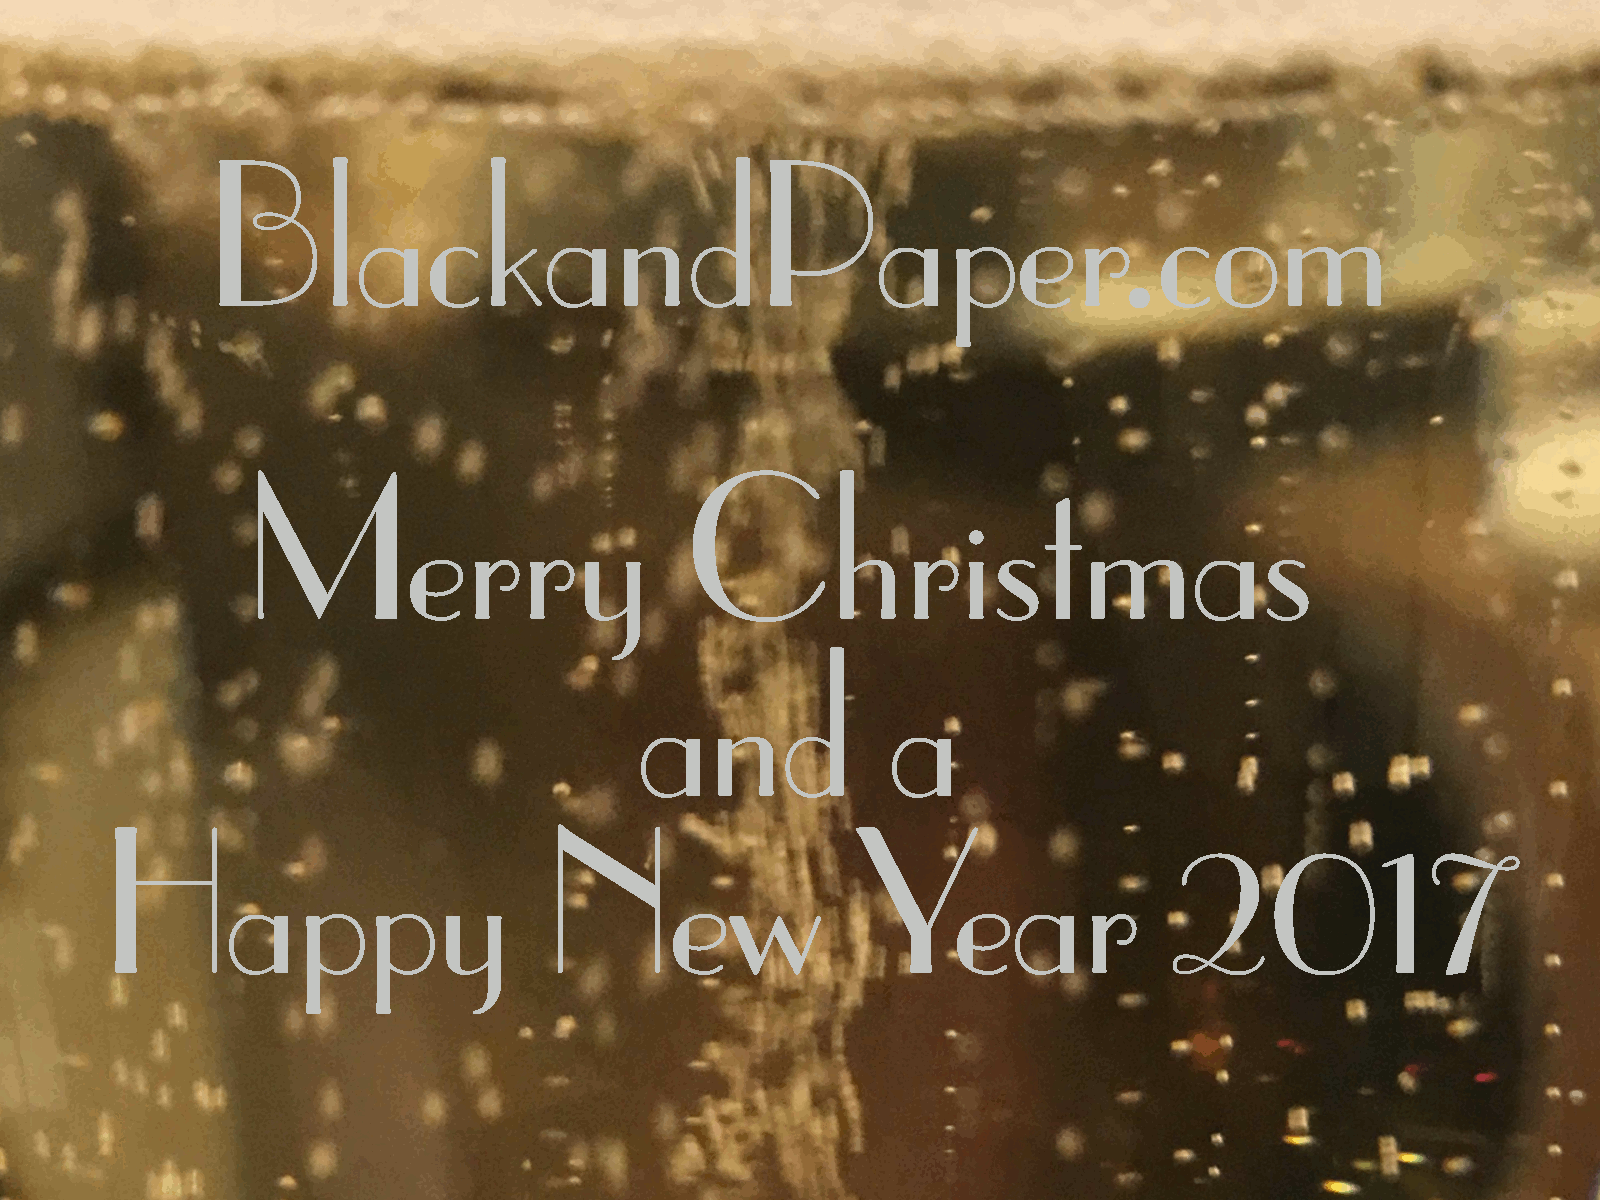 Happy Holidays from Black and Paper